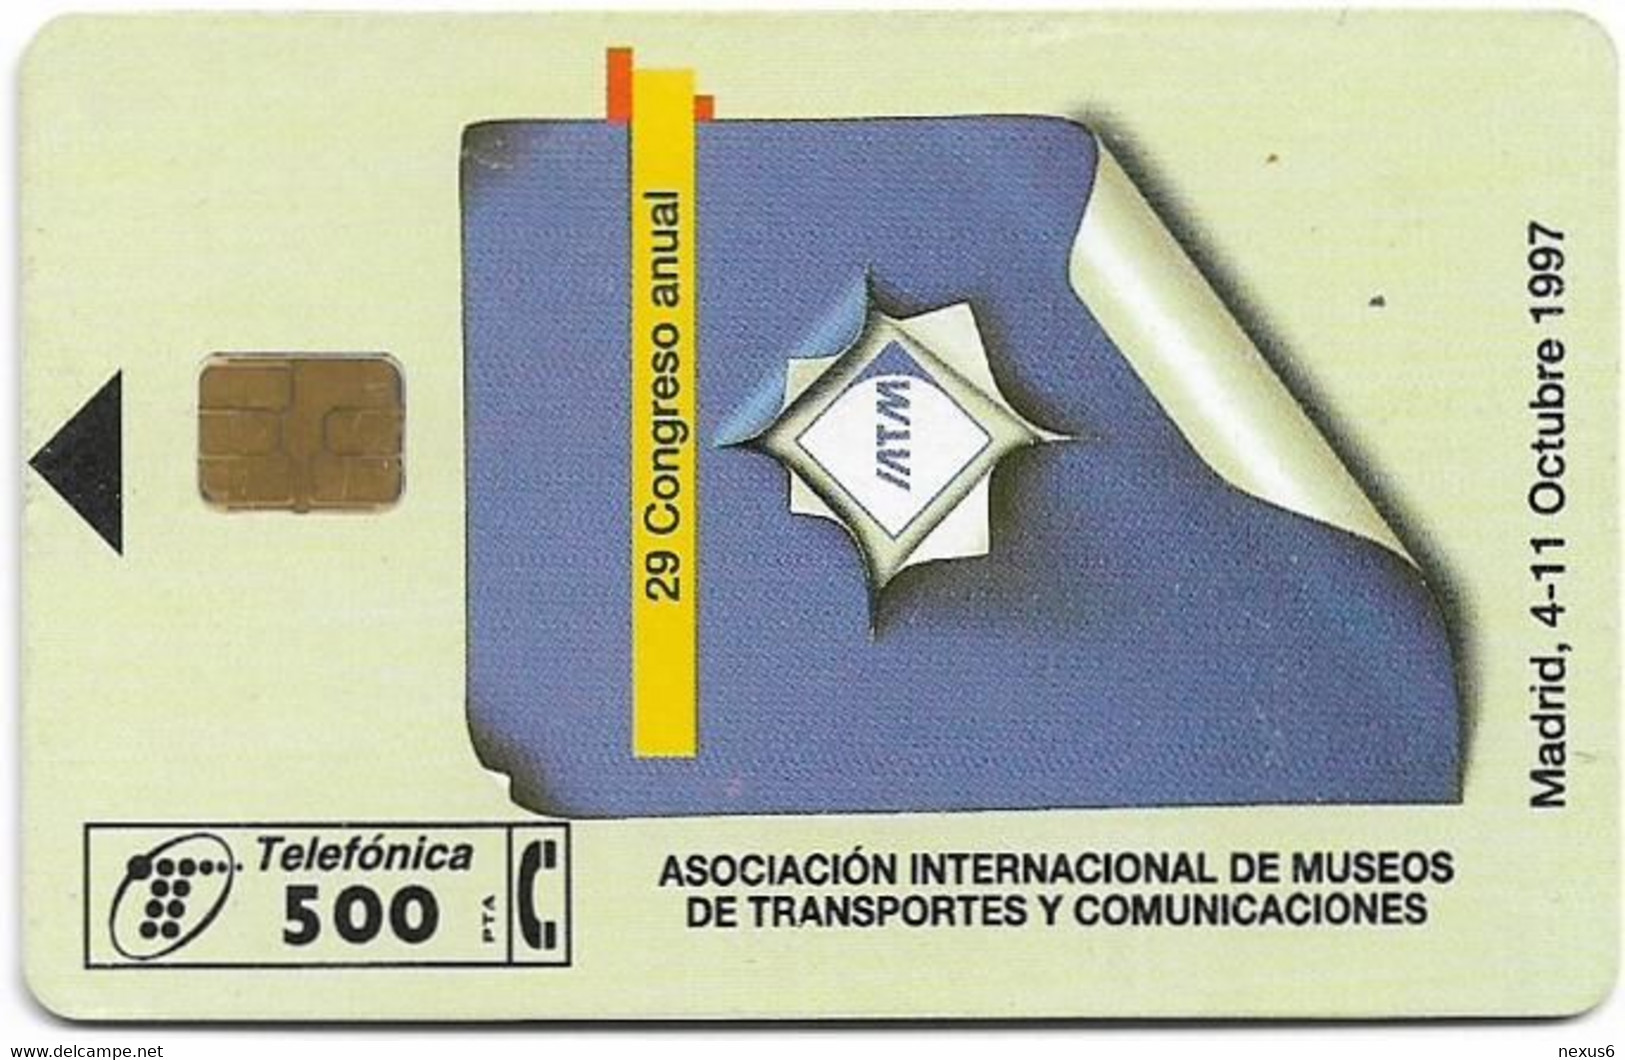 Spain - Telefónica - A.im.t.c. - G-014 - 10.1997, 500PTA, 5.000ex, Used - Gift Issues